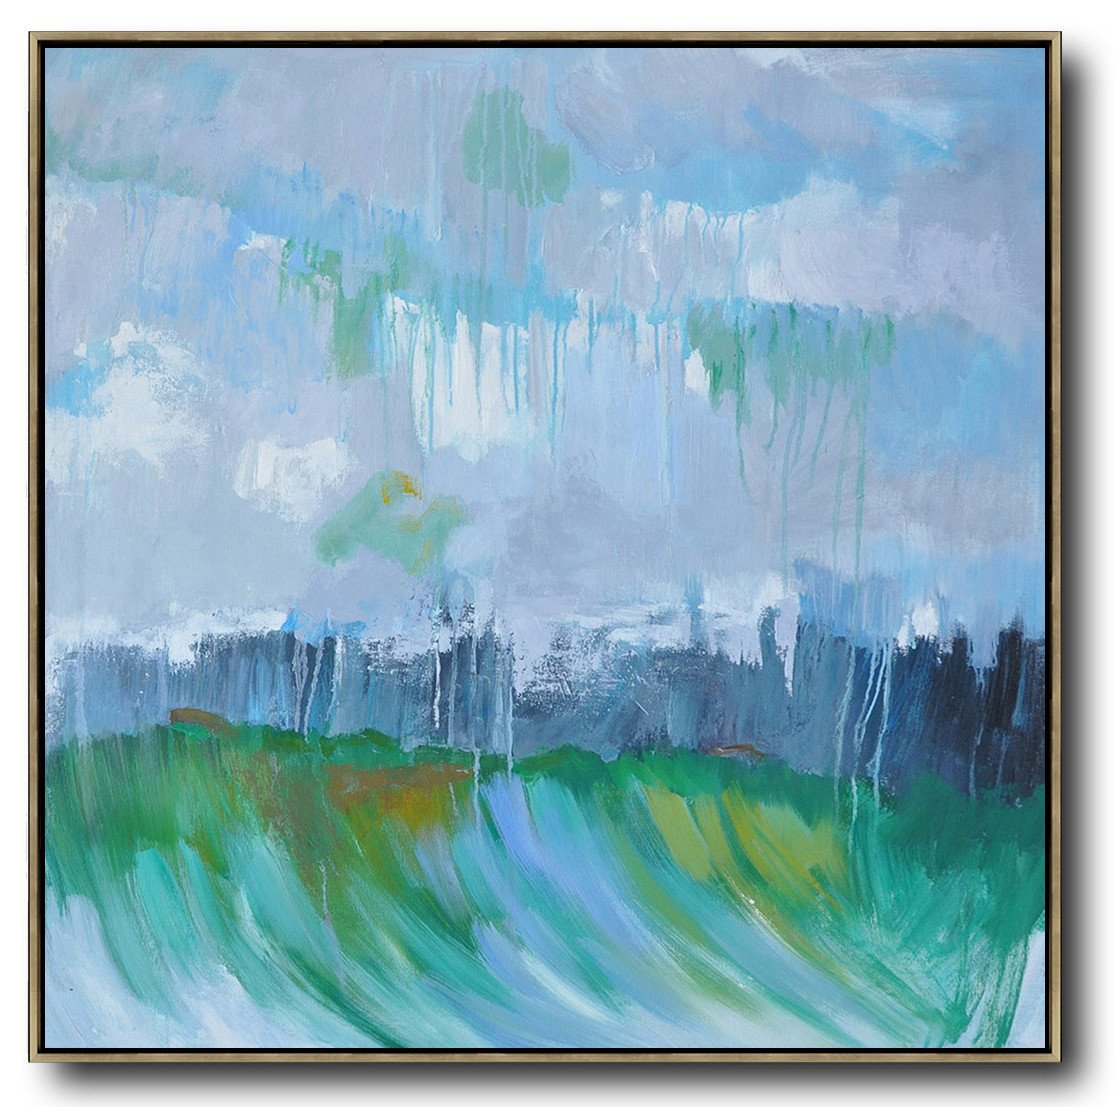 Hand-painted oversized Abstract Landscape Oil Painting by Jackson gallery wrapped canvas